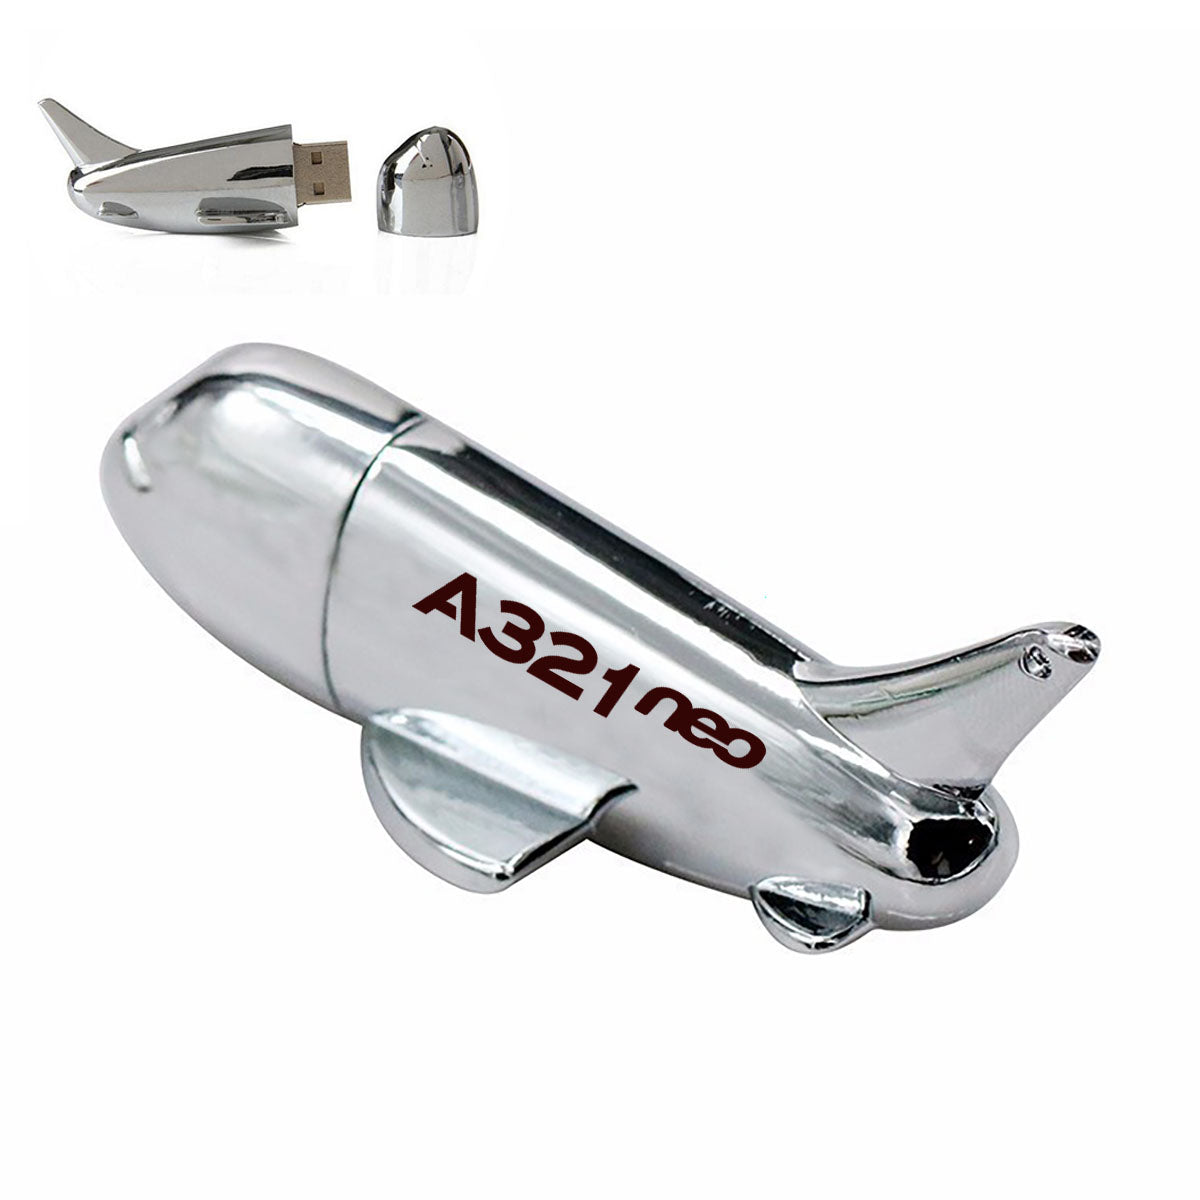 A321neo & Text Designed Airplane Shape USB Drives